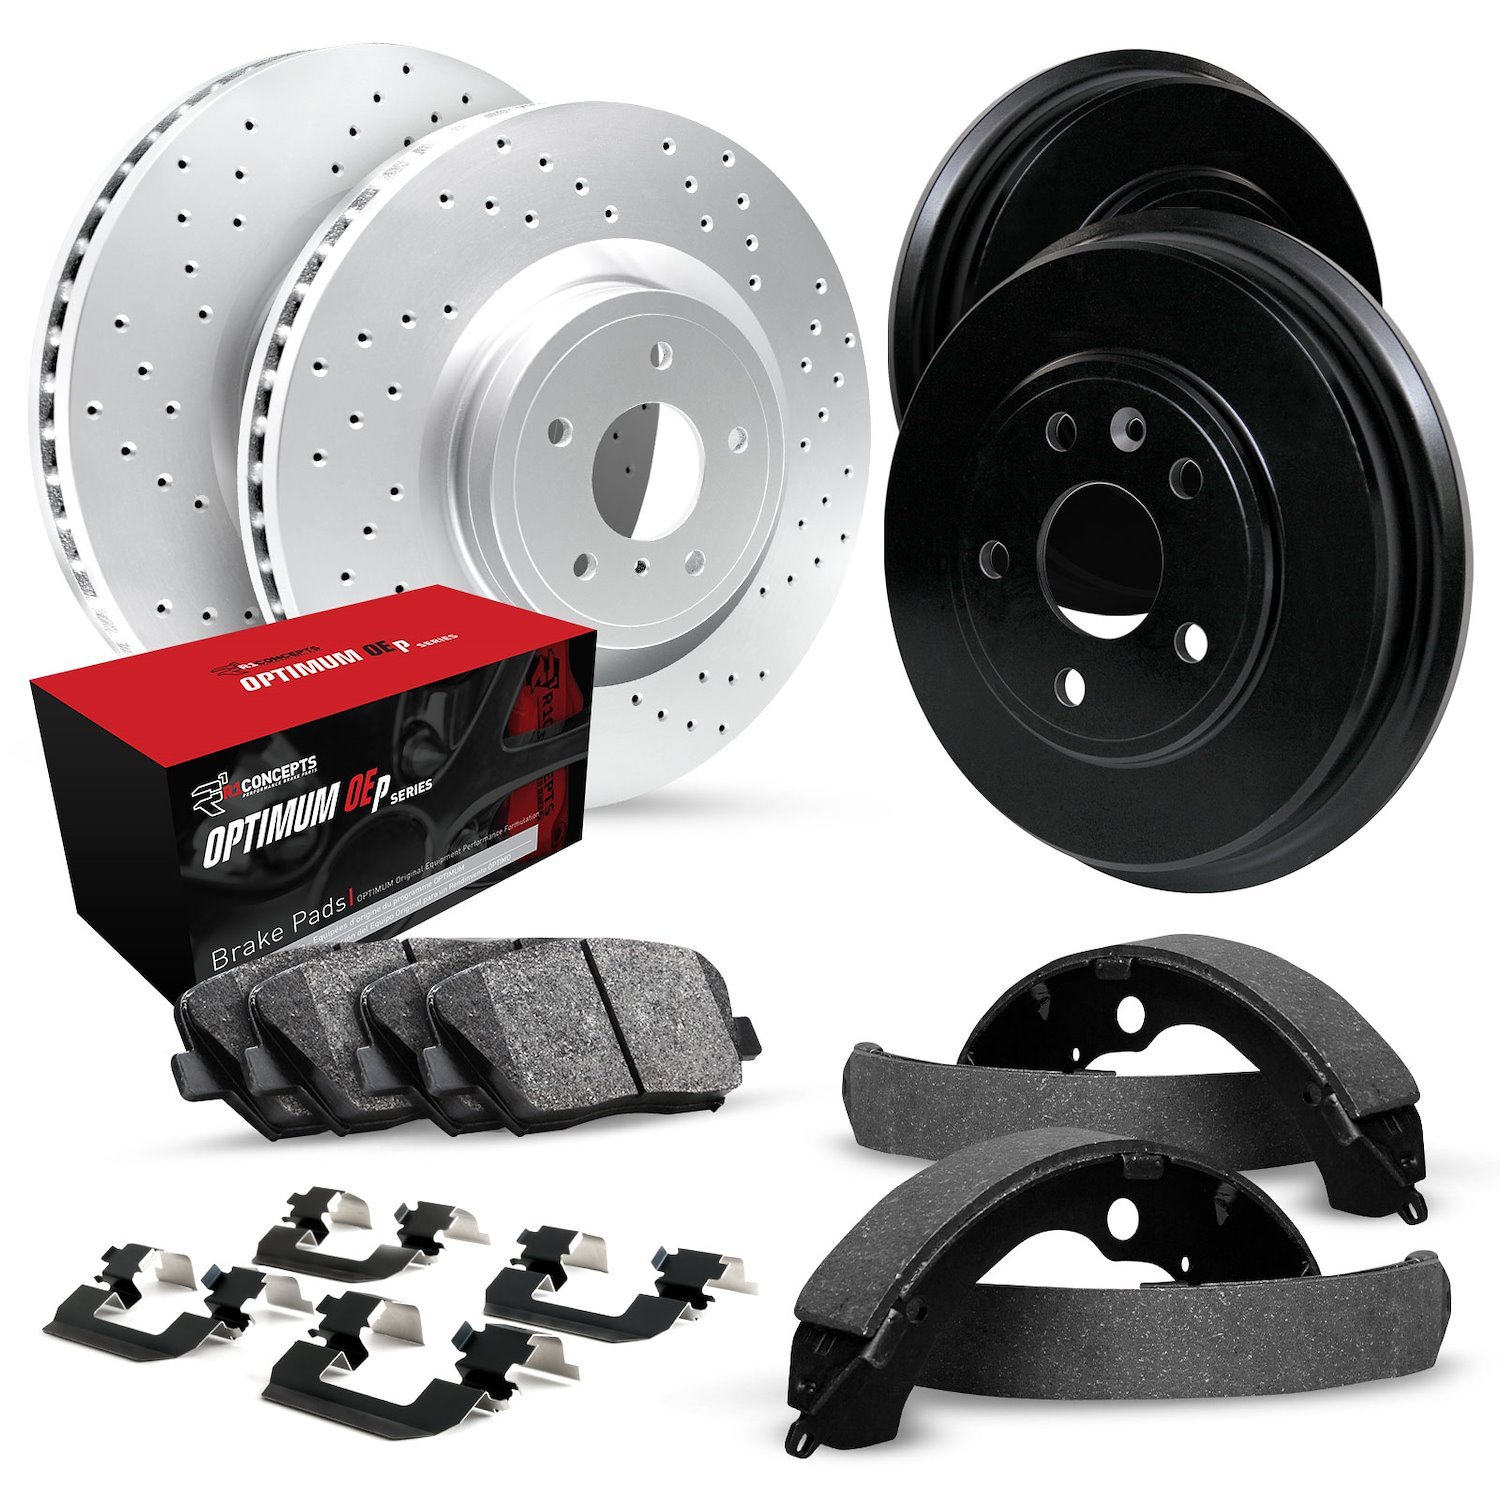 GEO-Carbon Drilled Brake Rotor & Drum Set w/Optimum OE Pads, Shoes, & Hardware, 1990-2000 GM, Position: Front & Rear